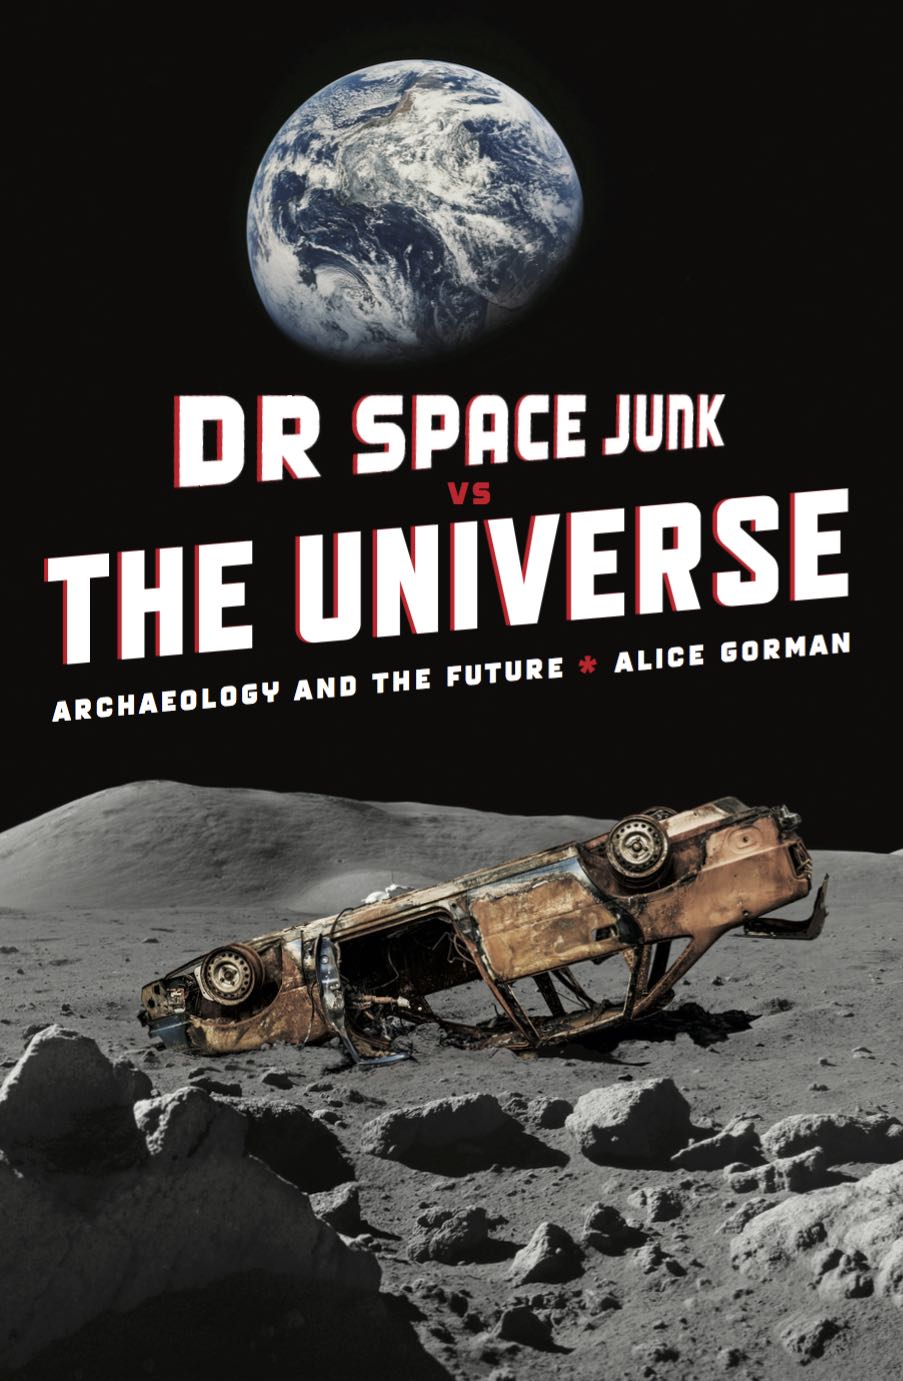 Dr Space Junk vs The Universe: Archaeology and the Future.